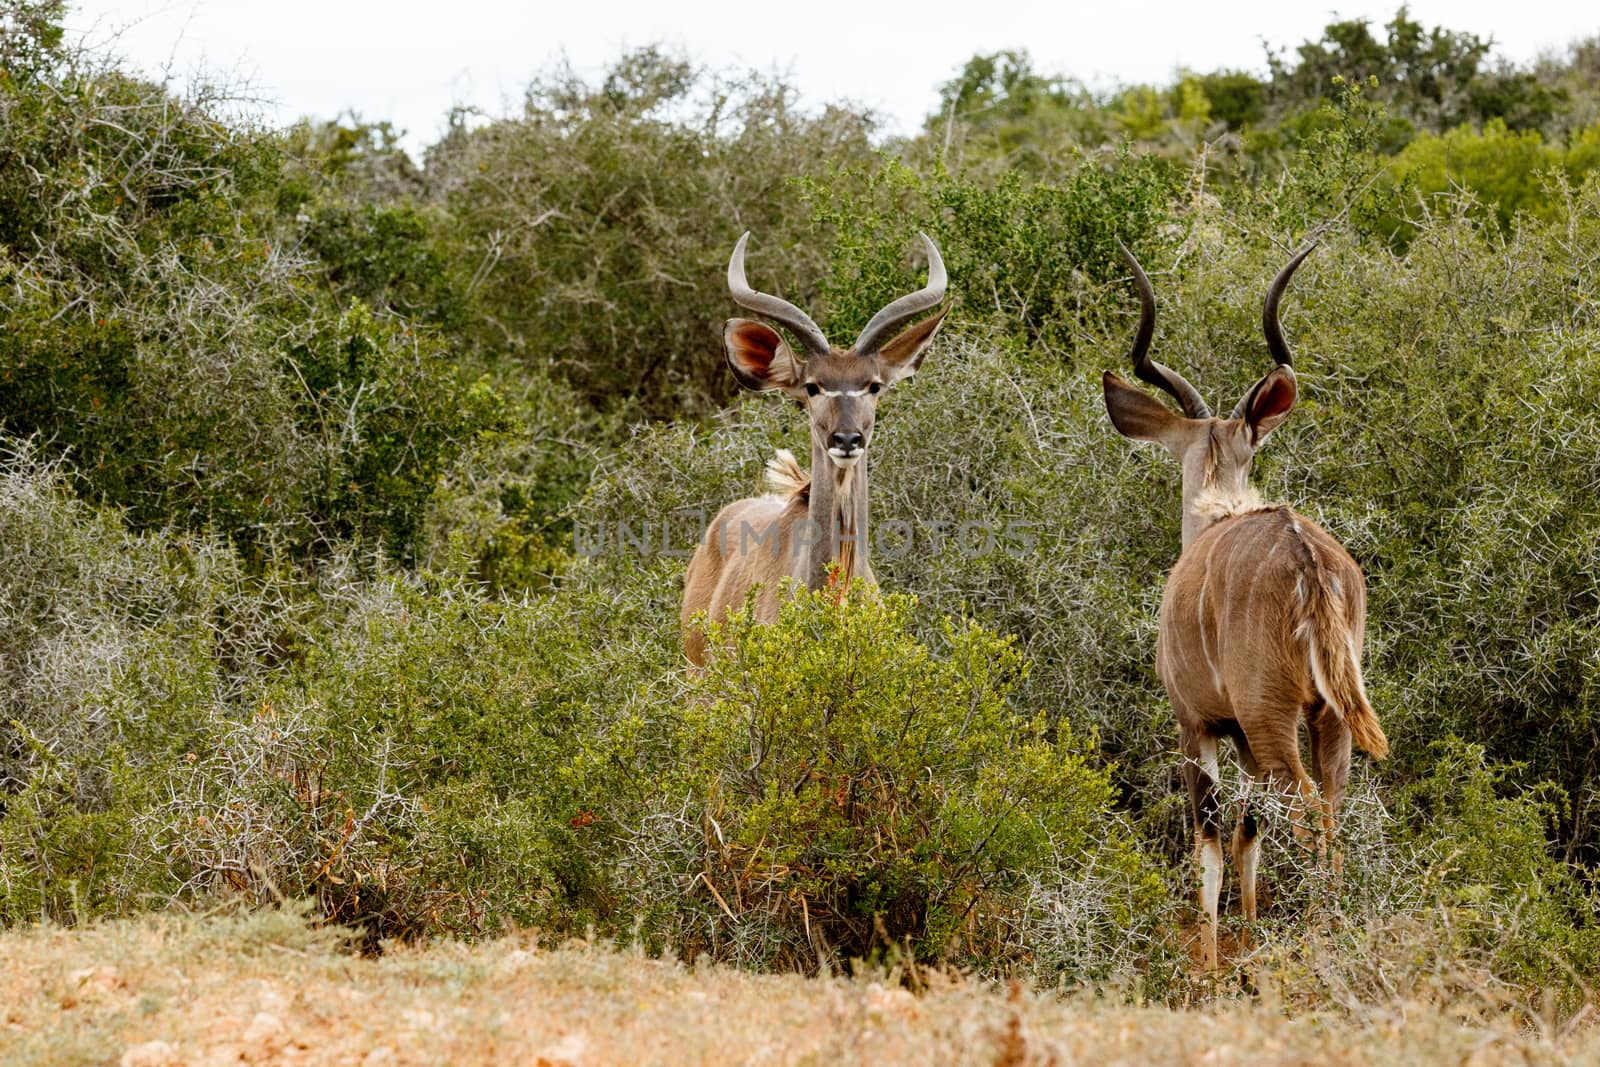 Two Greater Kudu standing and facing each other creating a mirror image.